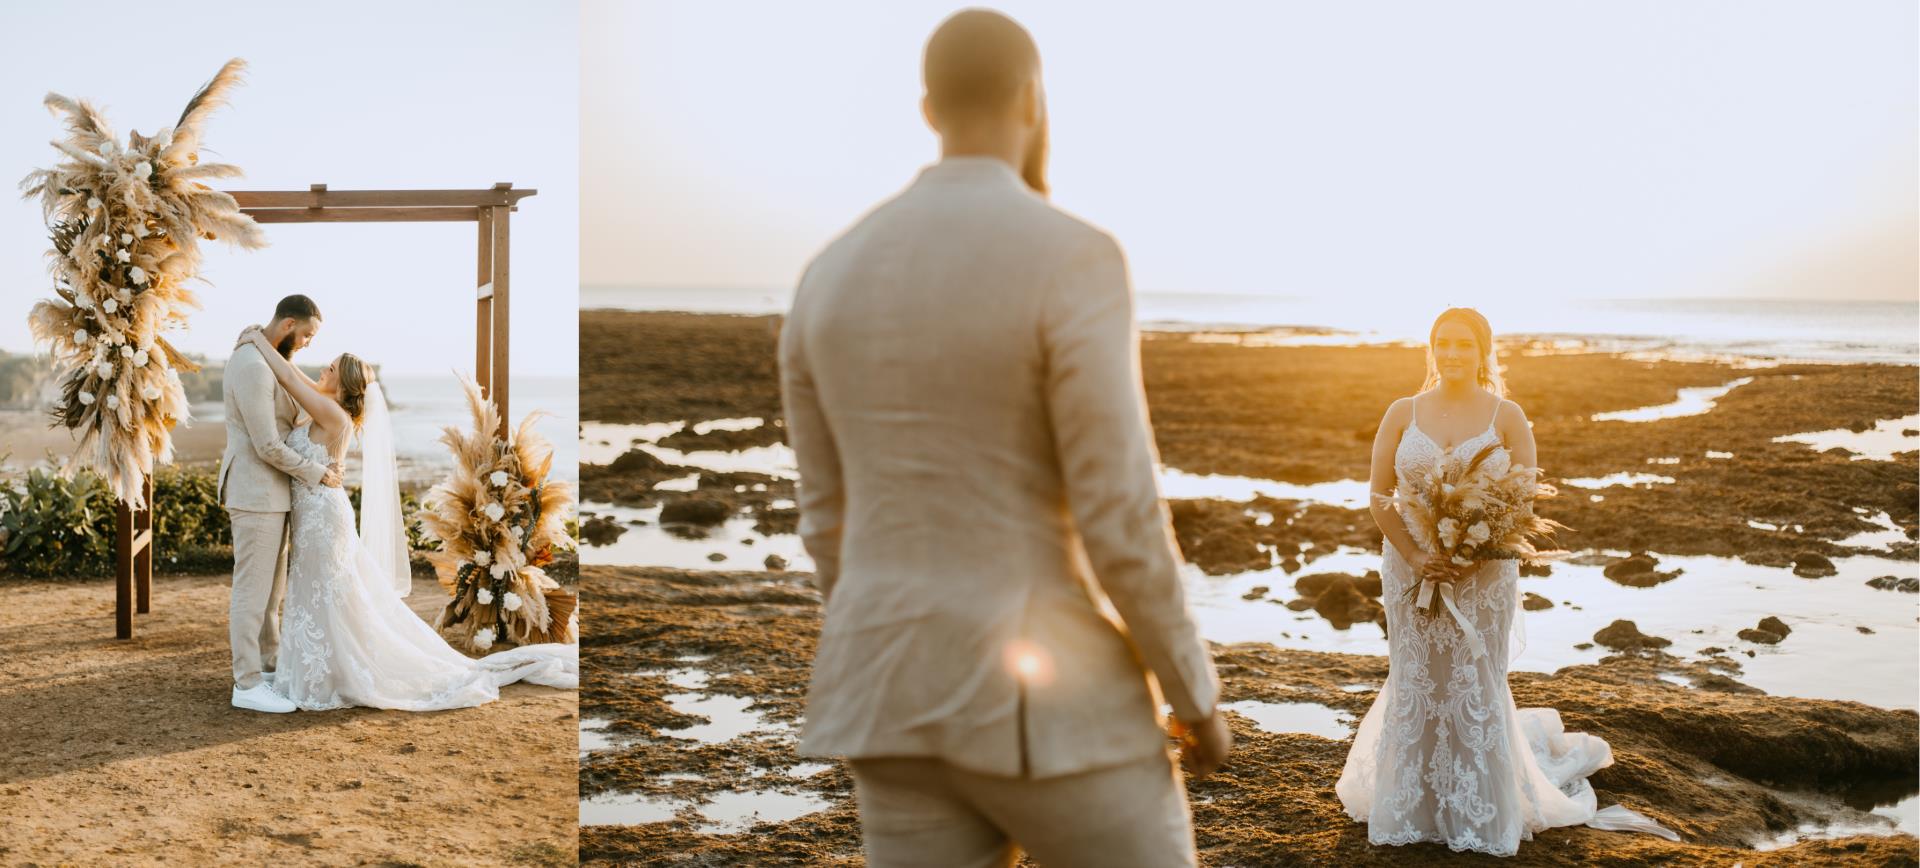 All inclusive Elope to Bali Wedding Package with Cliffside Ceremony